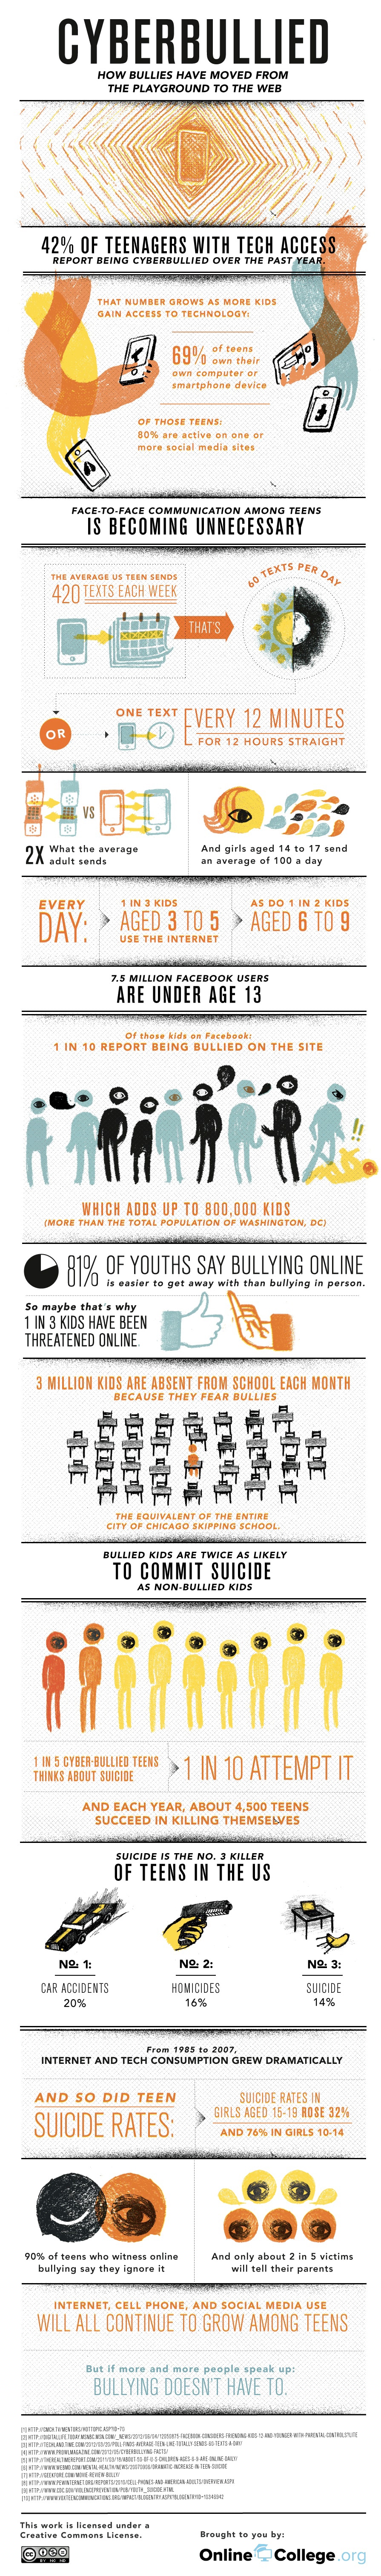 Cyberbullying: Don’t Let Bullies Ruin Your Online Life [Infographic]